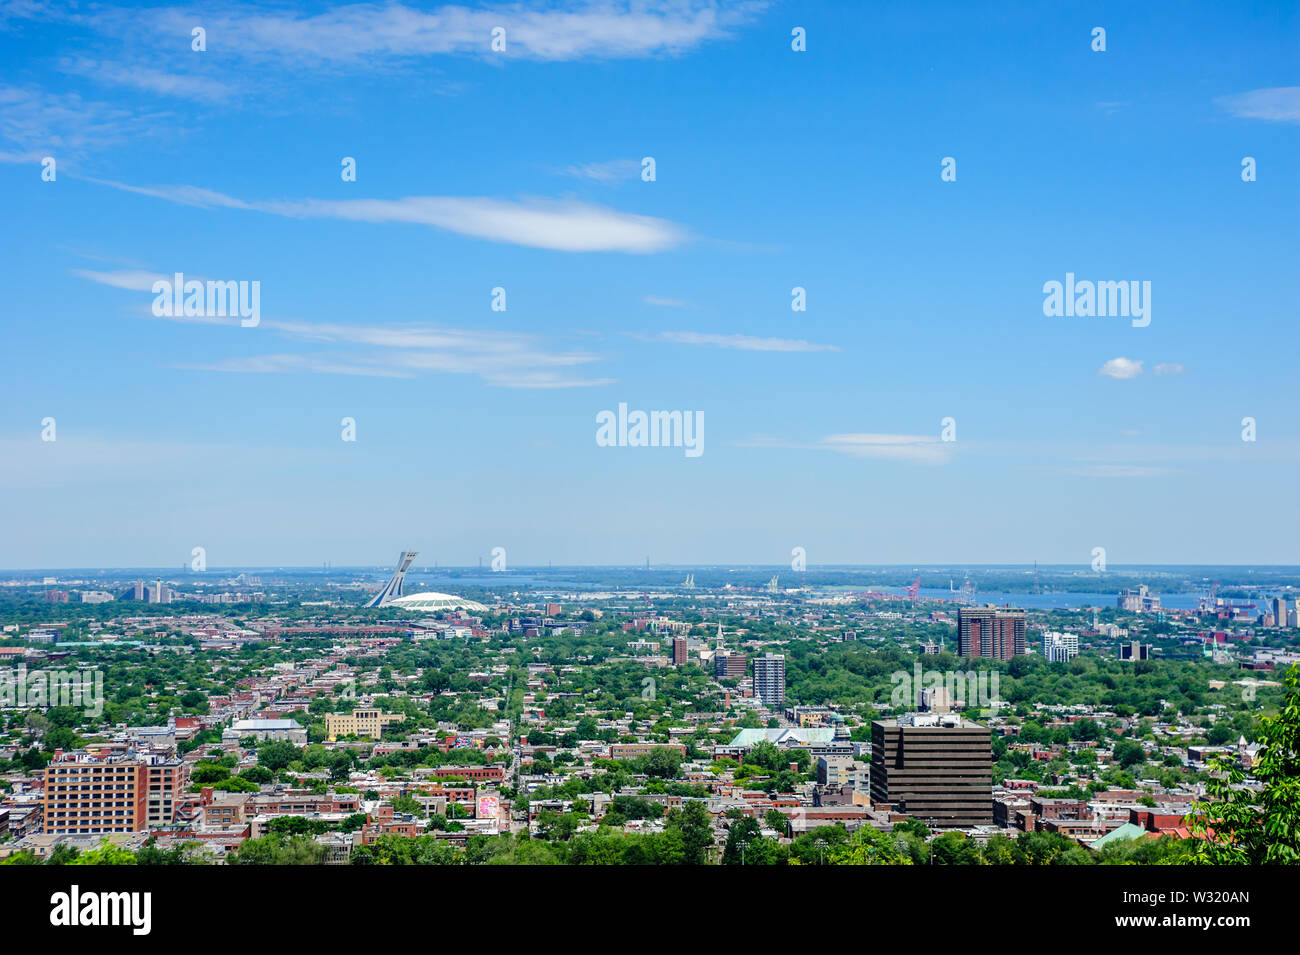 MONTREAL, CANADA - JUNE 16, 2018: The Olympic Stadium and low-rise buildings can be seen looking north-east from Mount Royal. Stock Photo